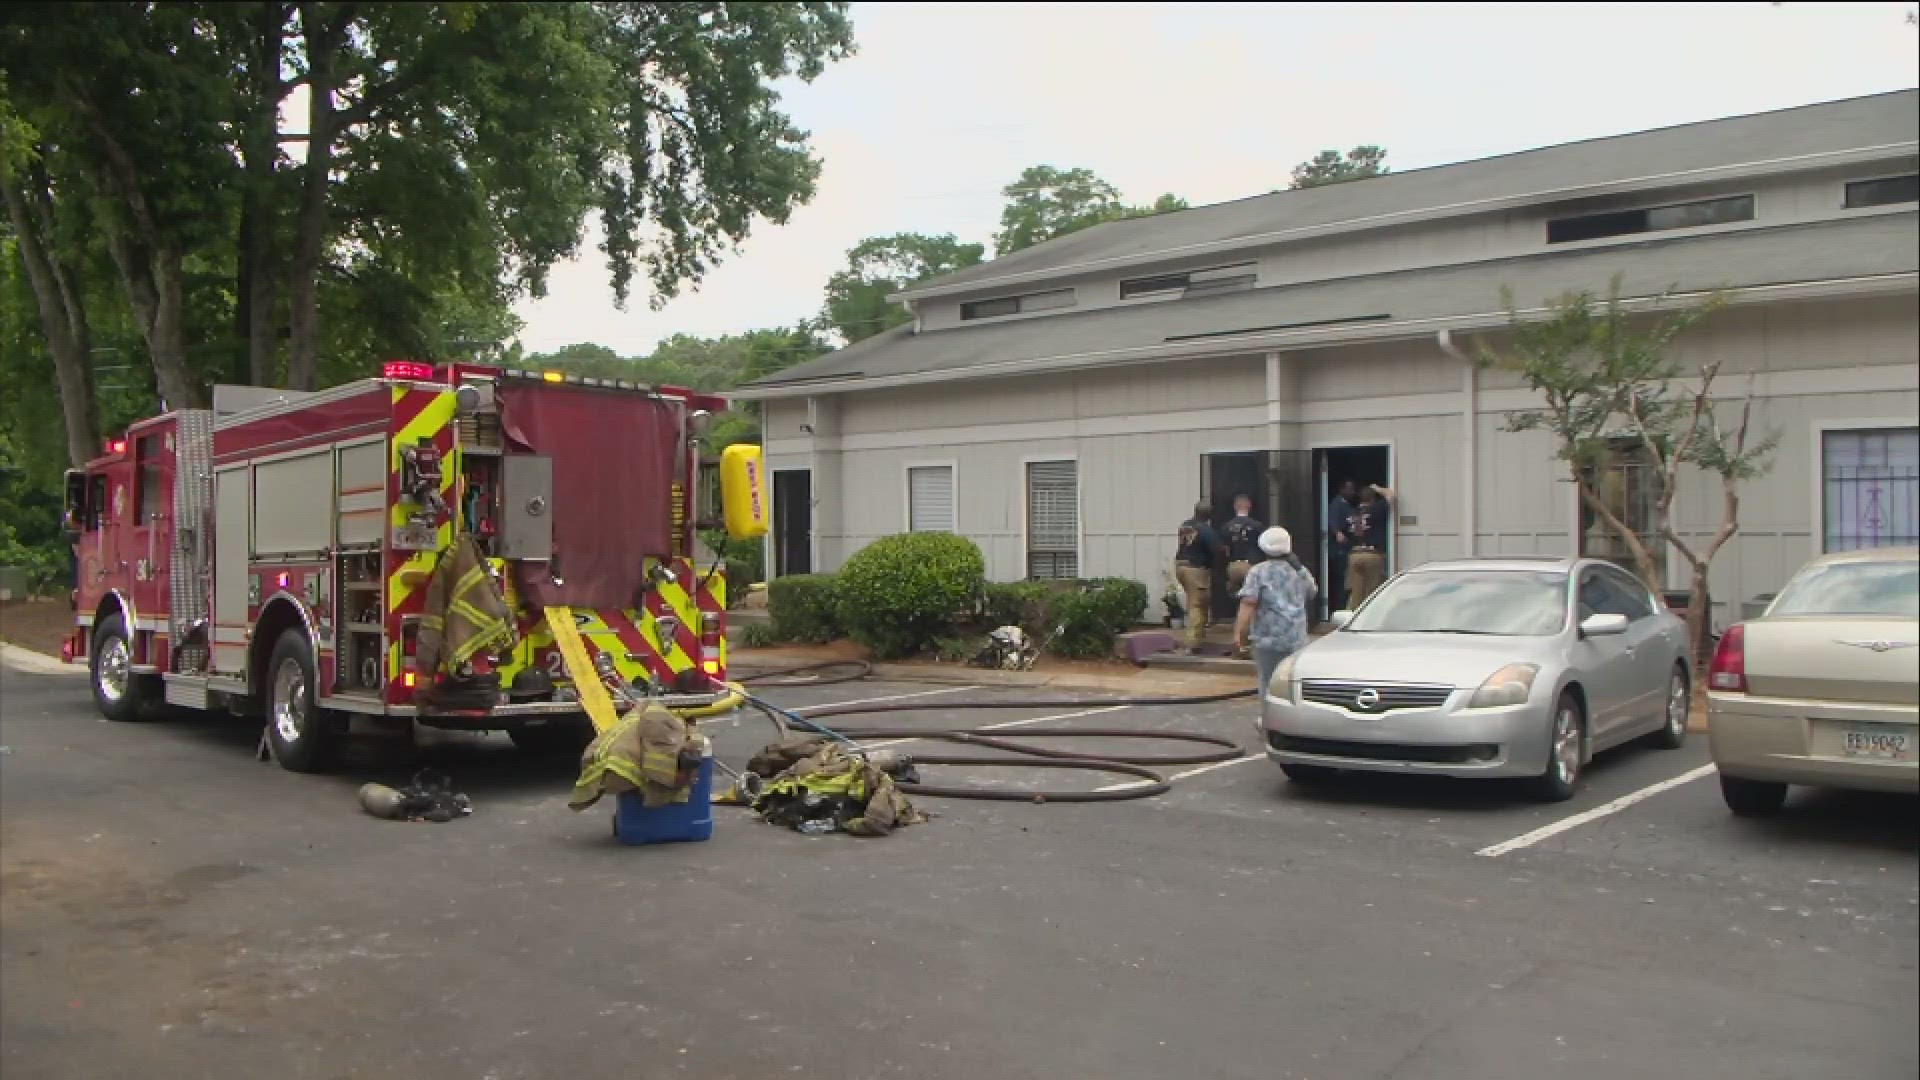 According to DeKalb County Fire and Rescue Services, a call came in around 11:15 a.m. regarding a fire at 2893 Panthersville Road, which is the Decatur Lofts.